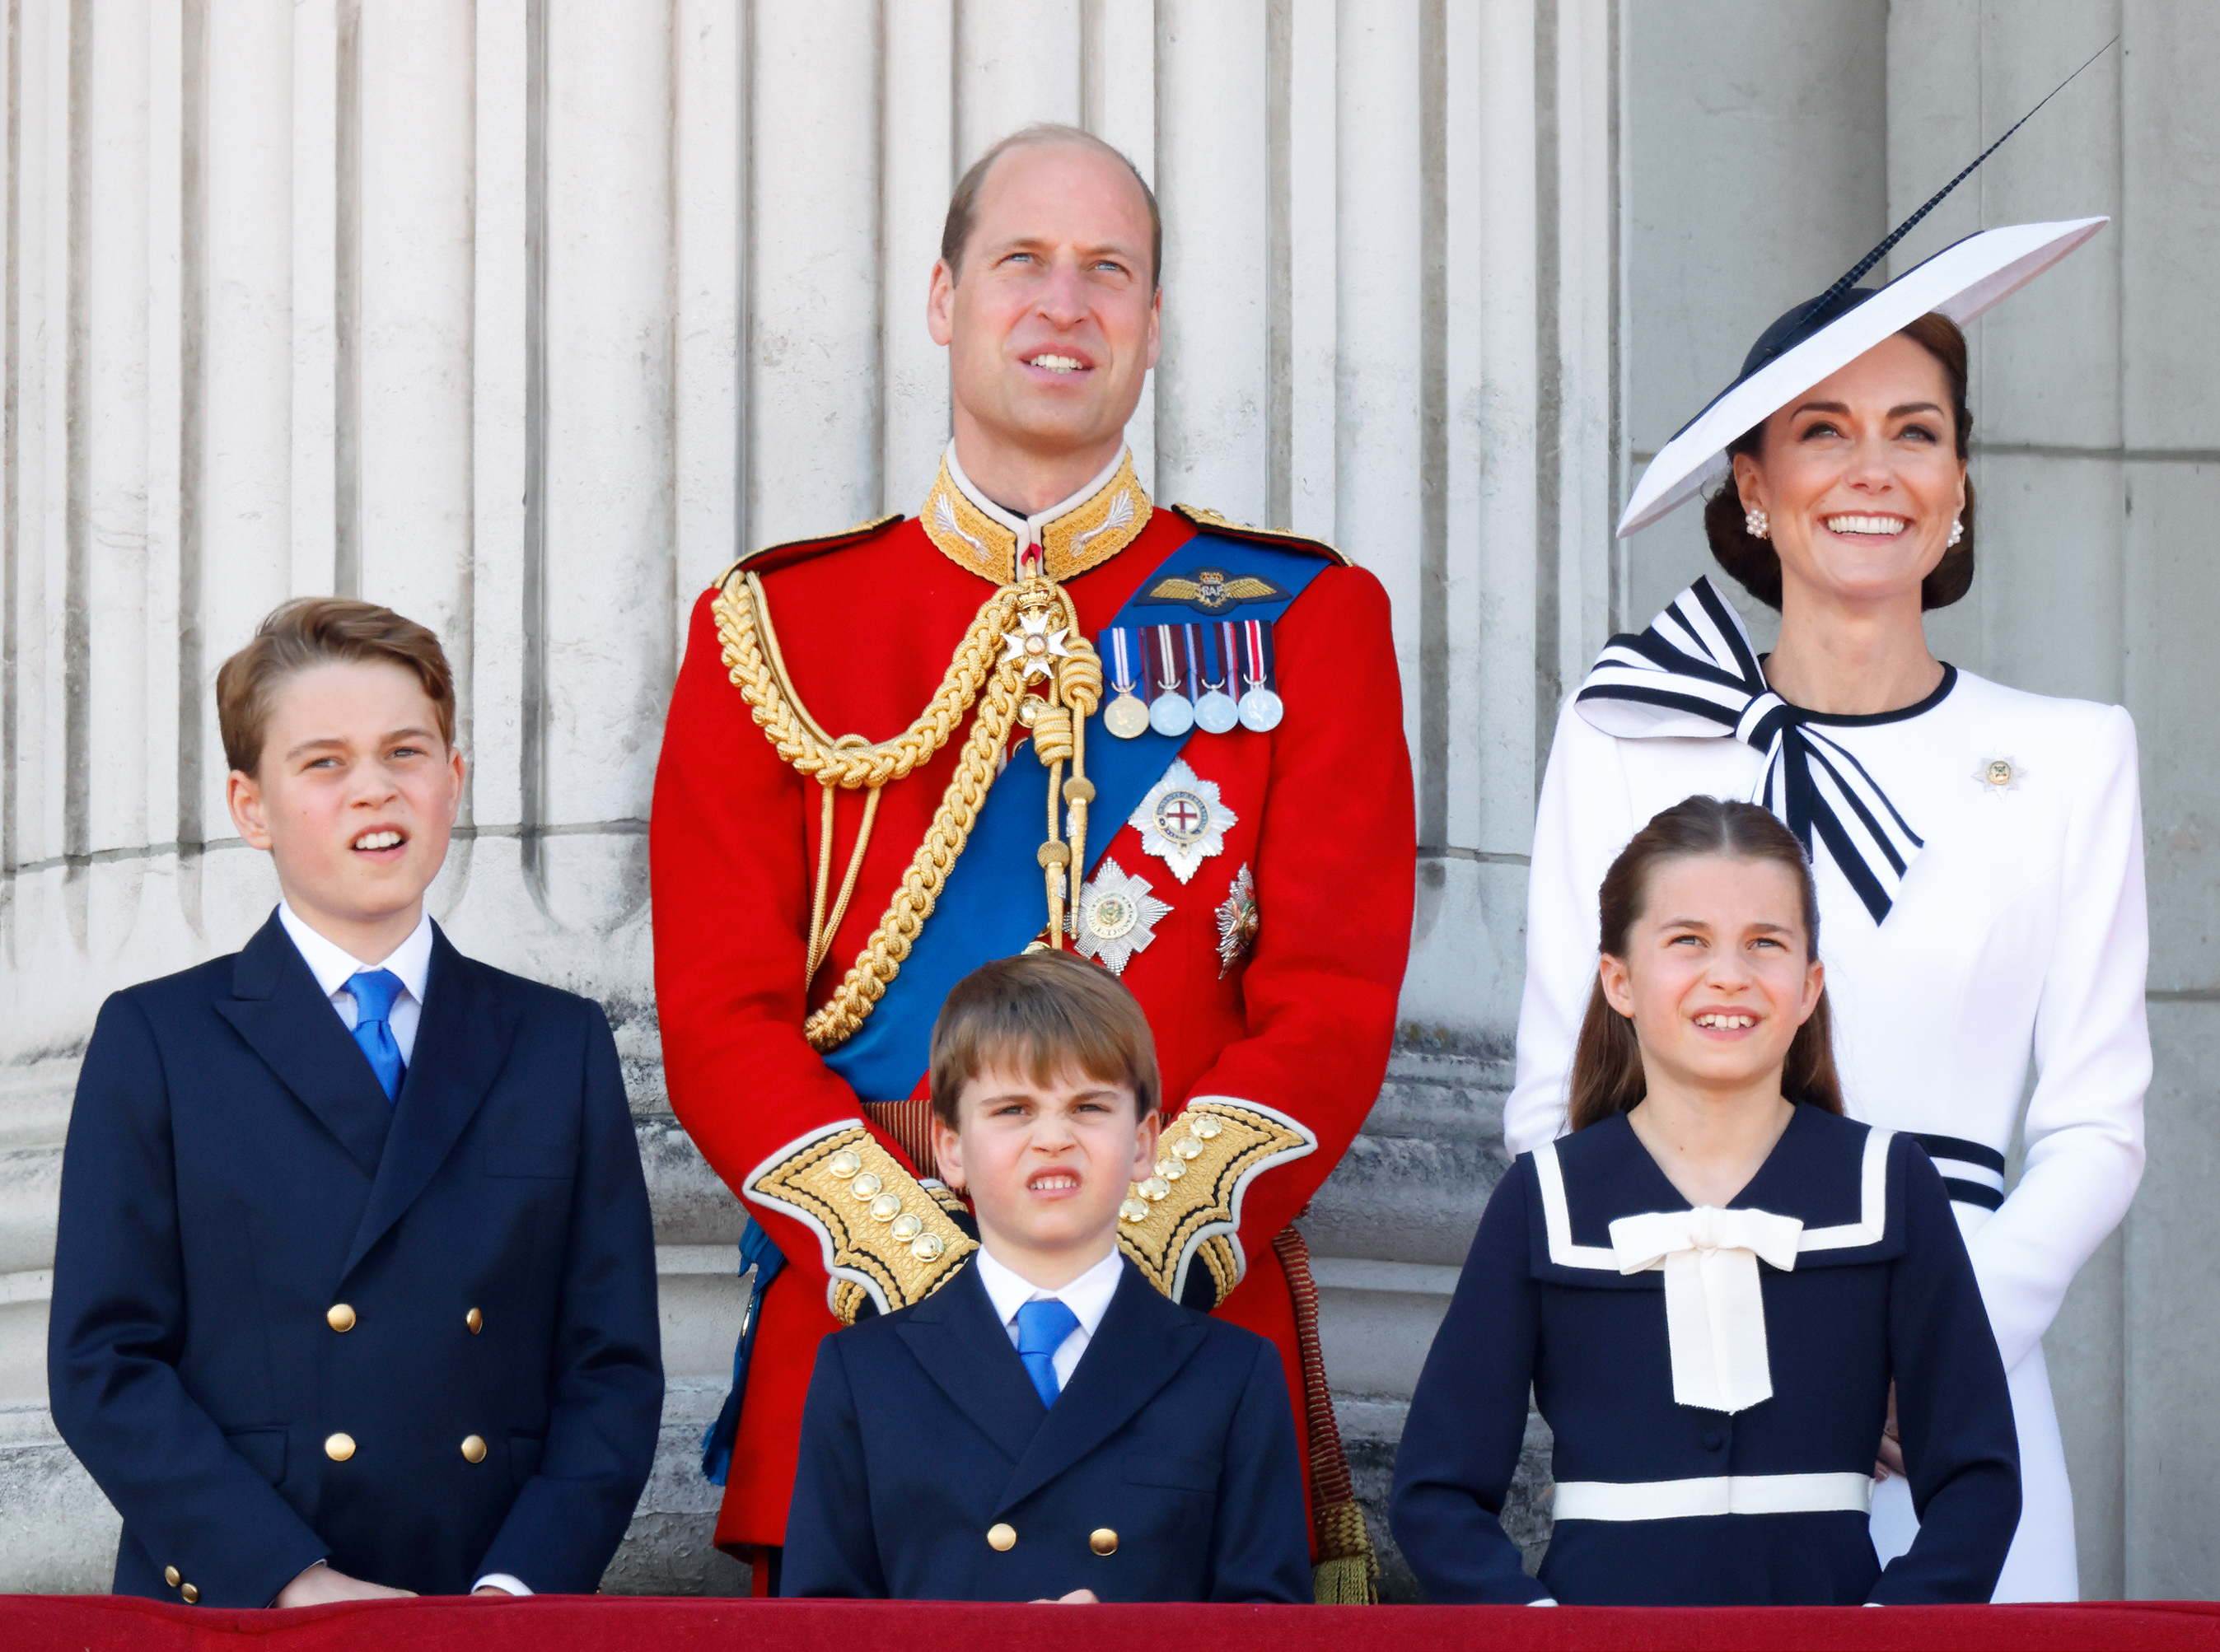 Prince George of Wales, Prince William, Prince of Wales, Prince Louis of Wales, Princess Charlotte of Wales, and Catherine, Princess of Wales on the balcony of Buckingham Palace attending Trooping the Colour in London, England, on June 15, 2024. | Source: Getty Images